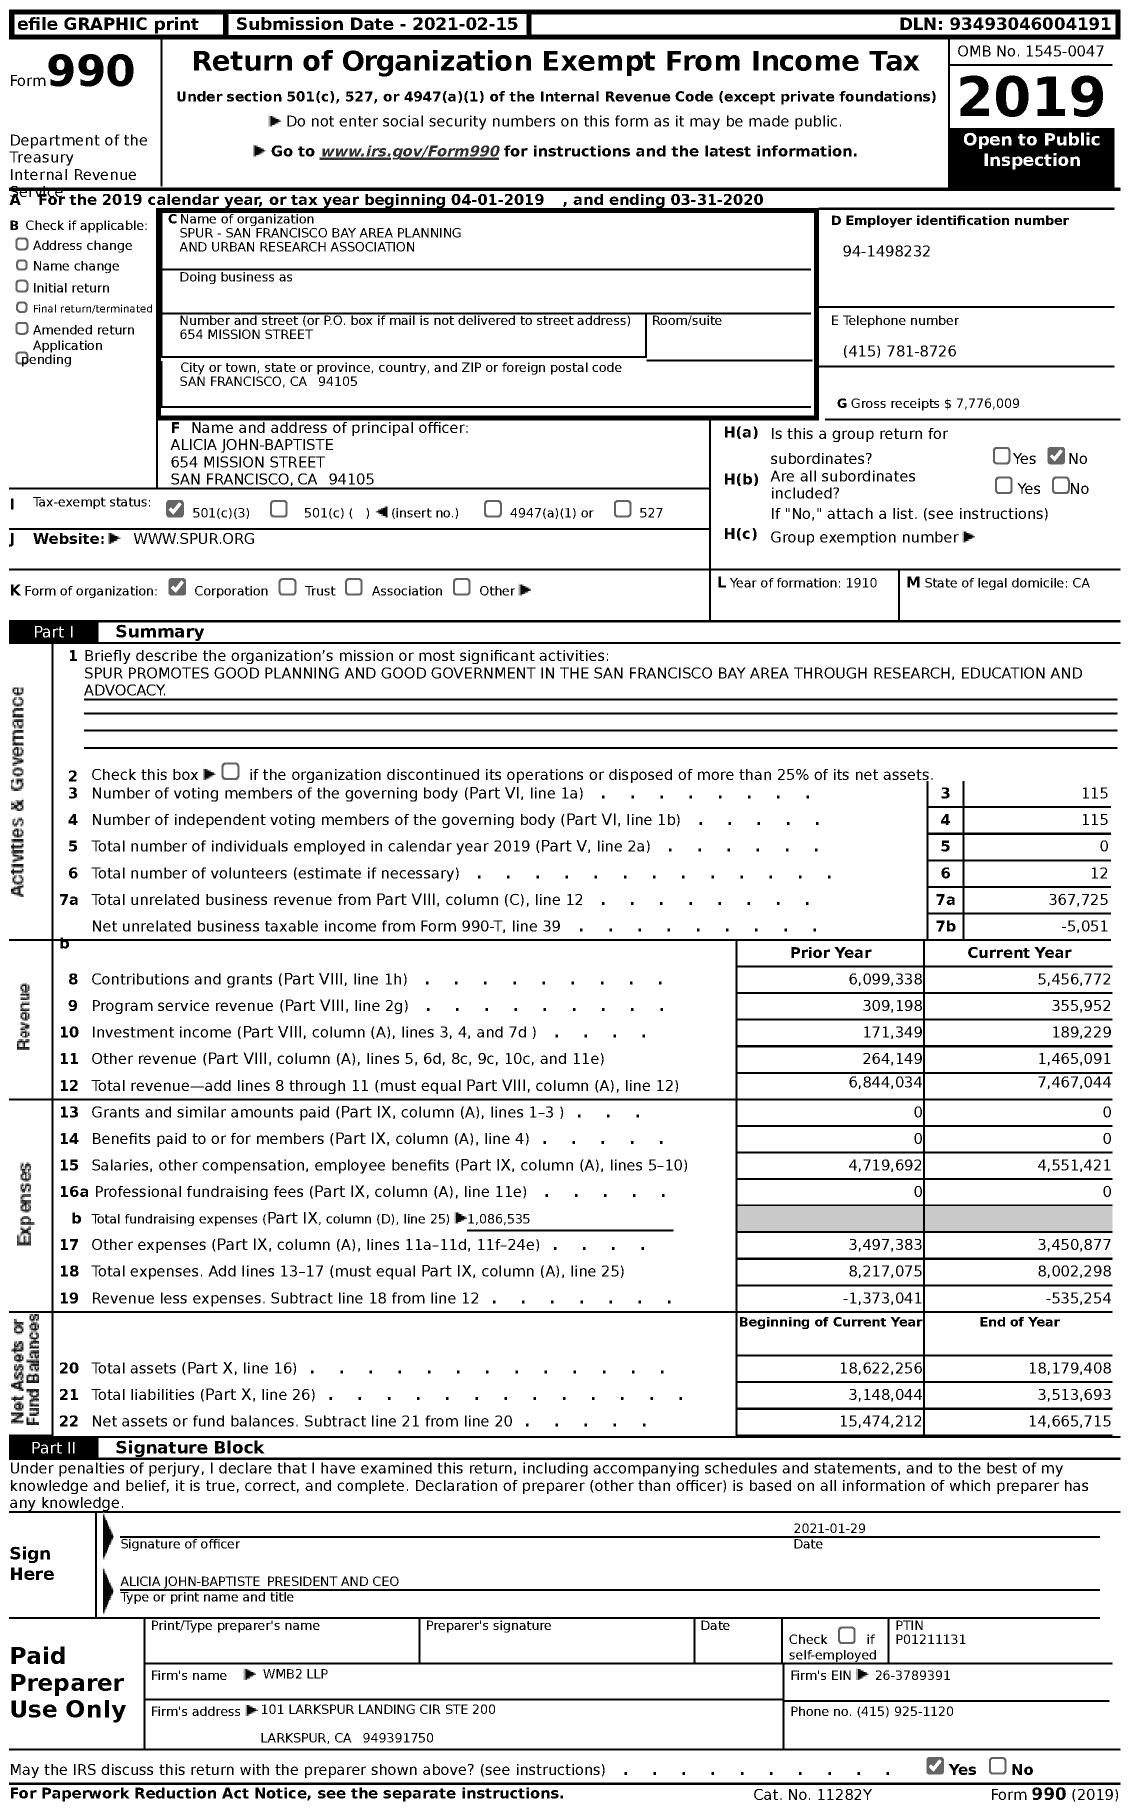 Image of first page of 2019 Form 990 for San Francisco Bay Are Planning and Urban Research Association (SPUR)